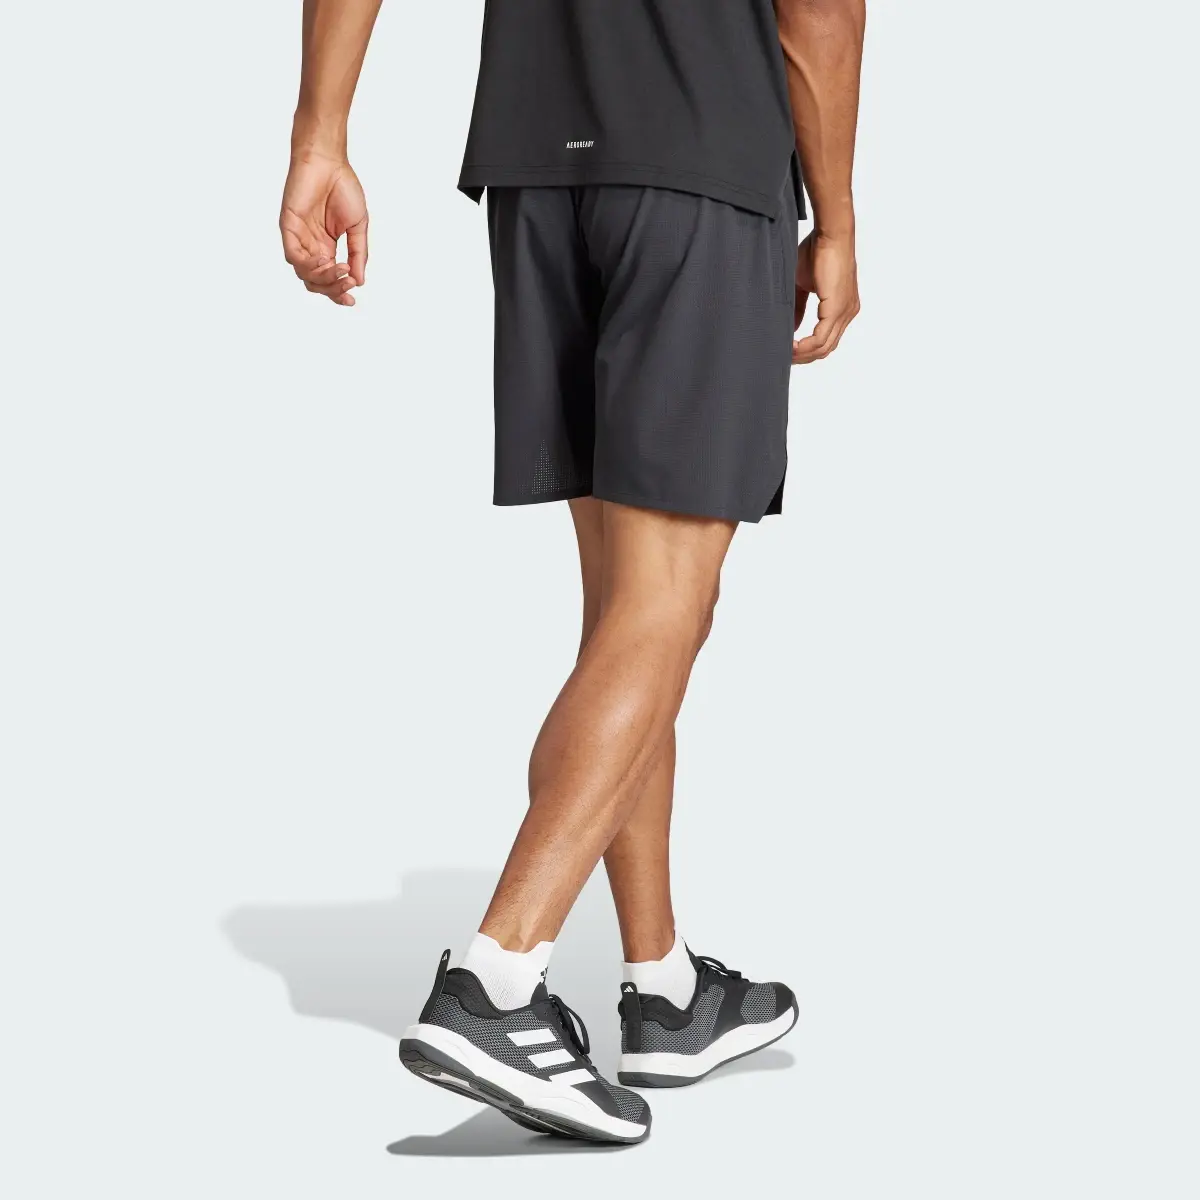 Adidas Designed for Training HIIT Workout HEAT.RDY Shorts. 2